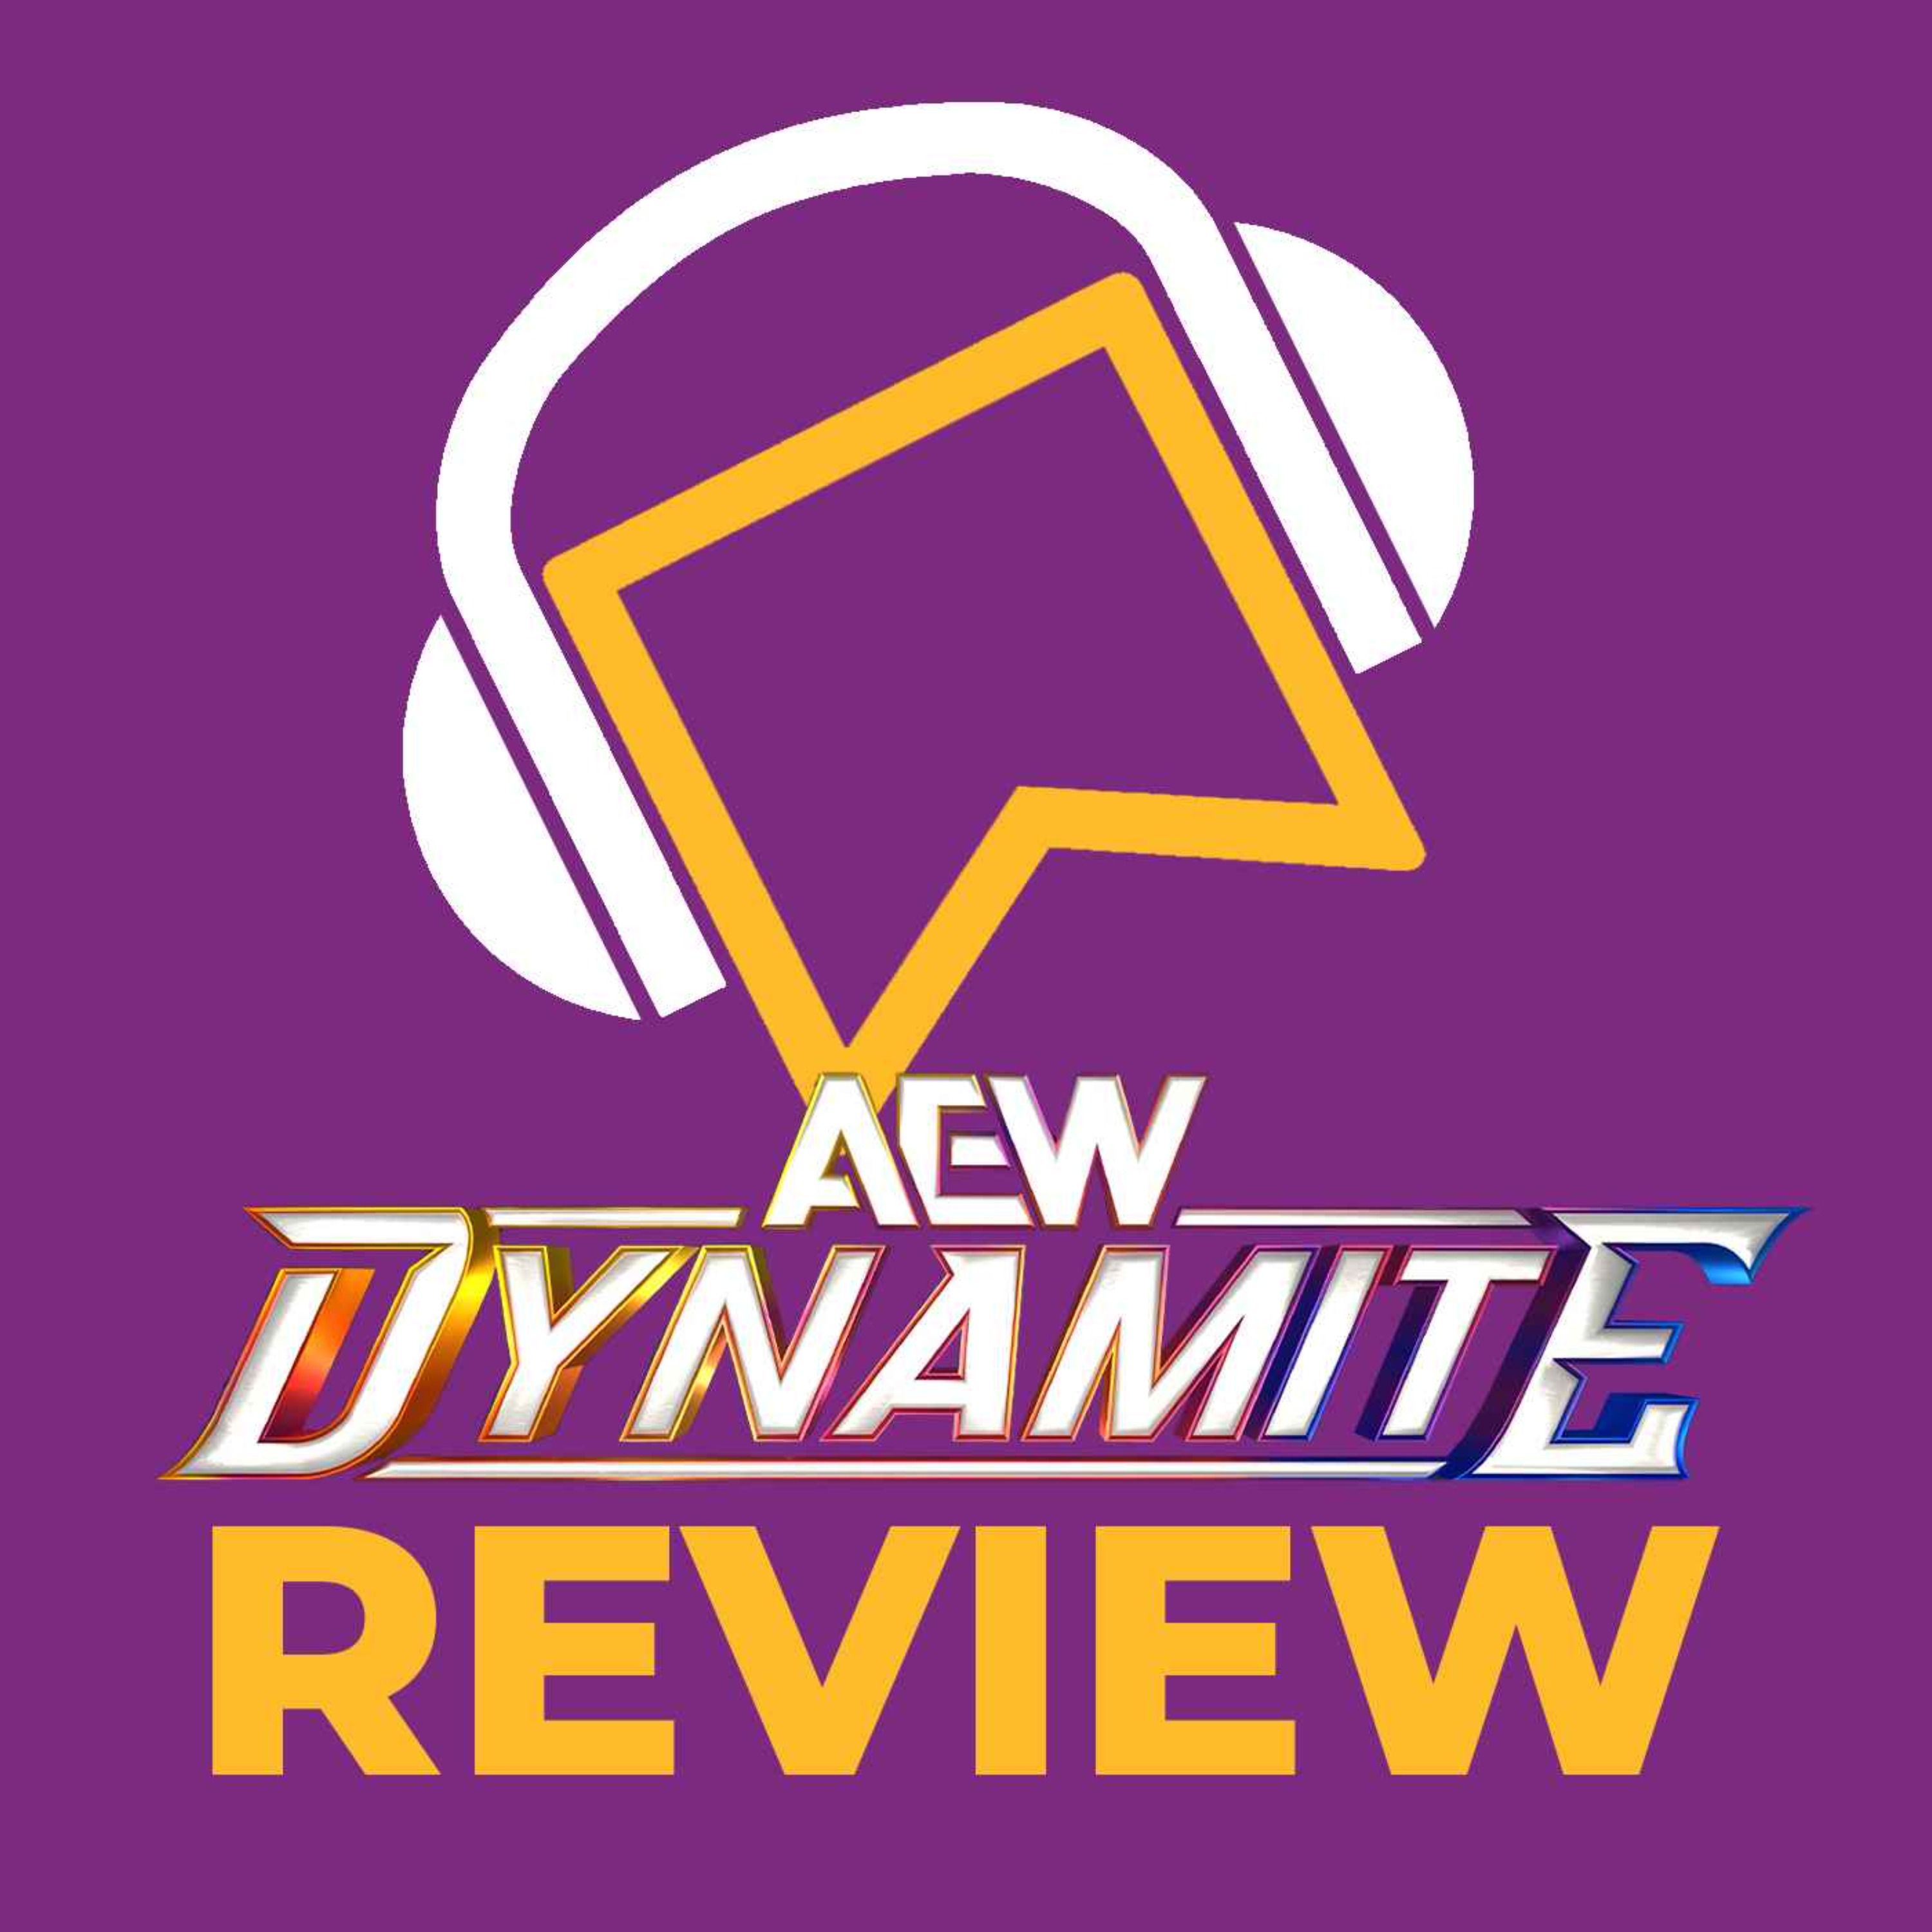 AEW Dynamite Review - Darby Allin RETURNS & Joins Team AEW! Christopher Daniels Gets FIRED! CHAOS At The Double Or Nothing Contract Signing! Malakai Black Takes Adam Copeland's Wedding Ring!